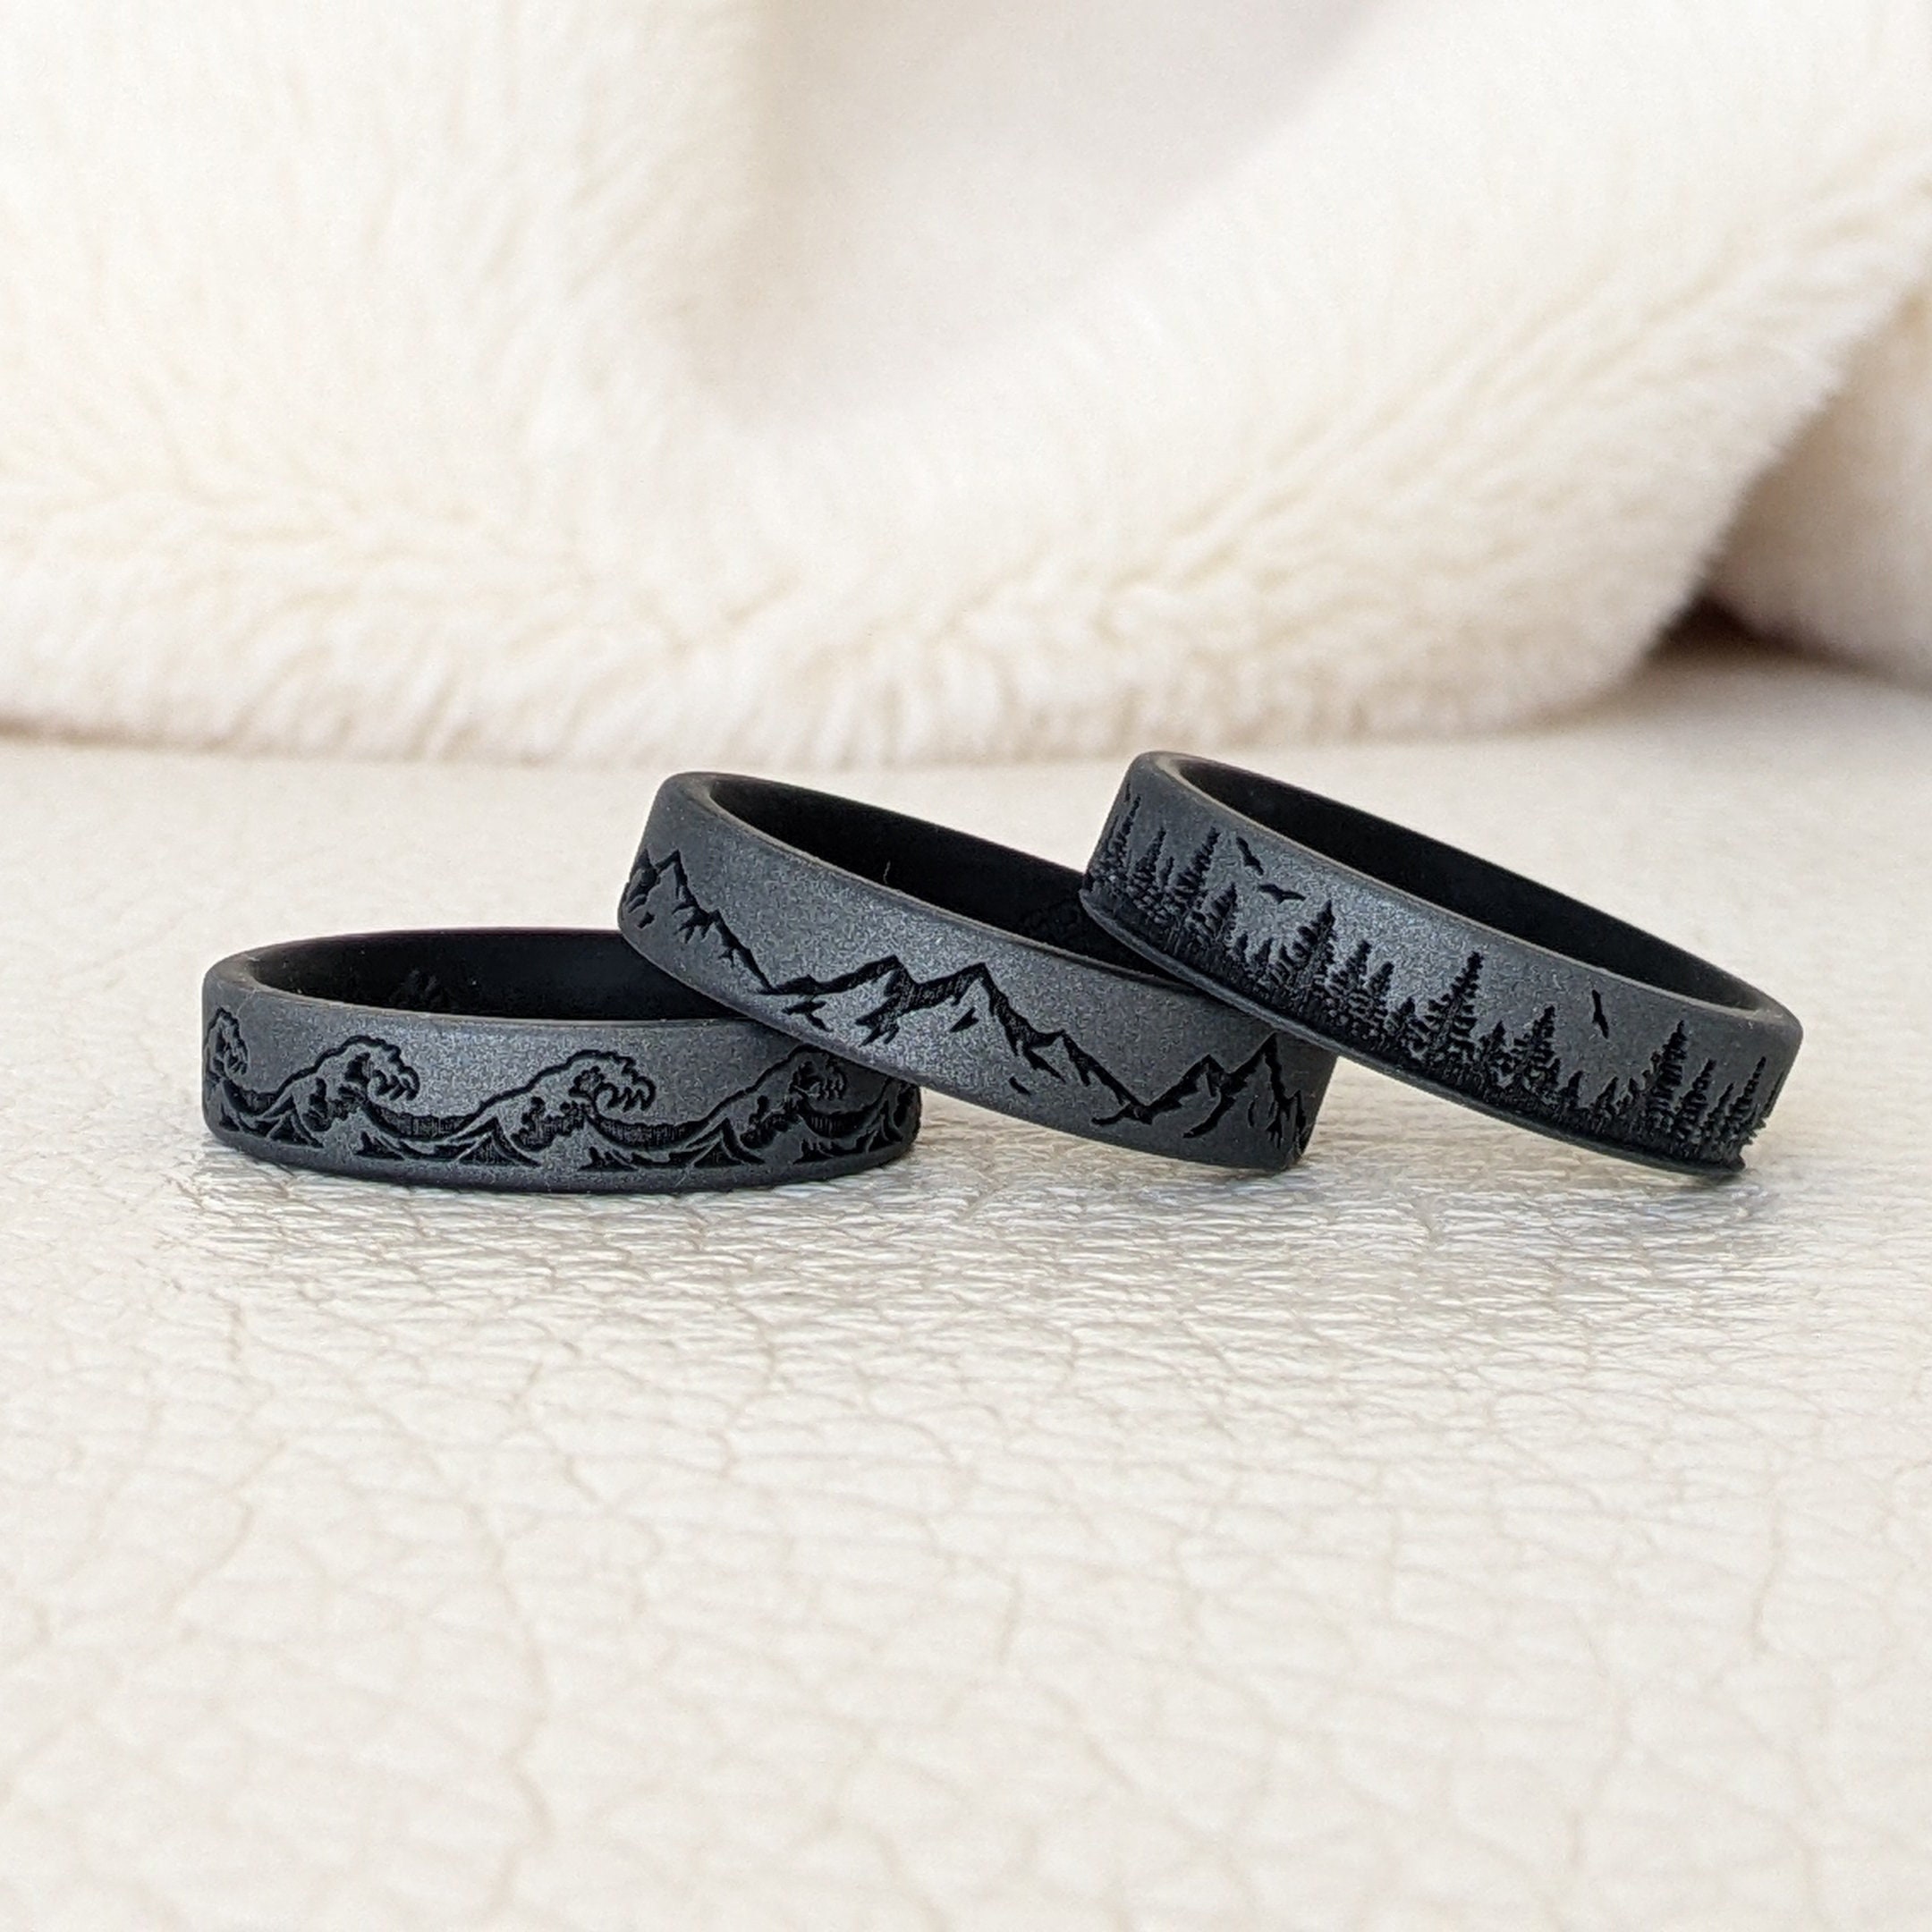 Two Piece Interchangeable Rubber Wedding Ring with Marble Pattern 7 mm Wide 2 Pack in Metal Gift Tin Ikonfitness Silicone Wedding Ring 